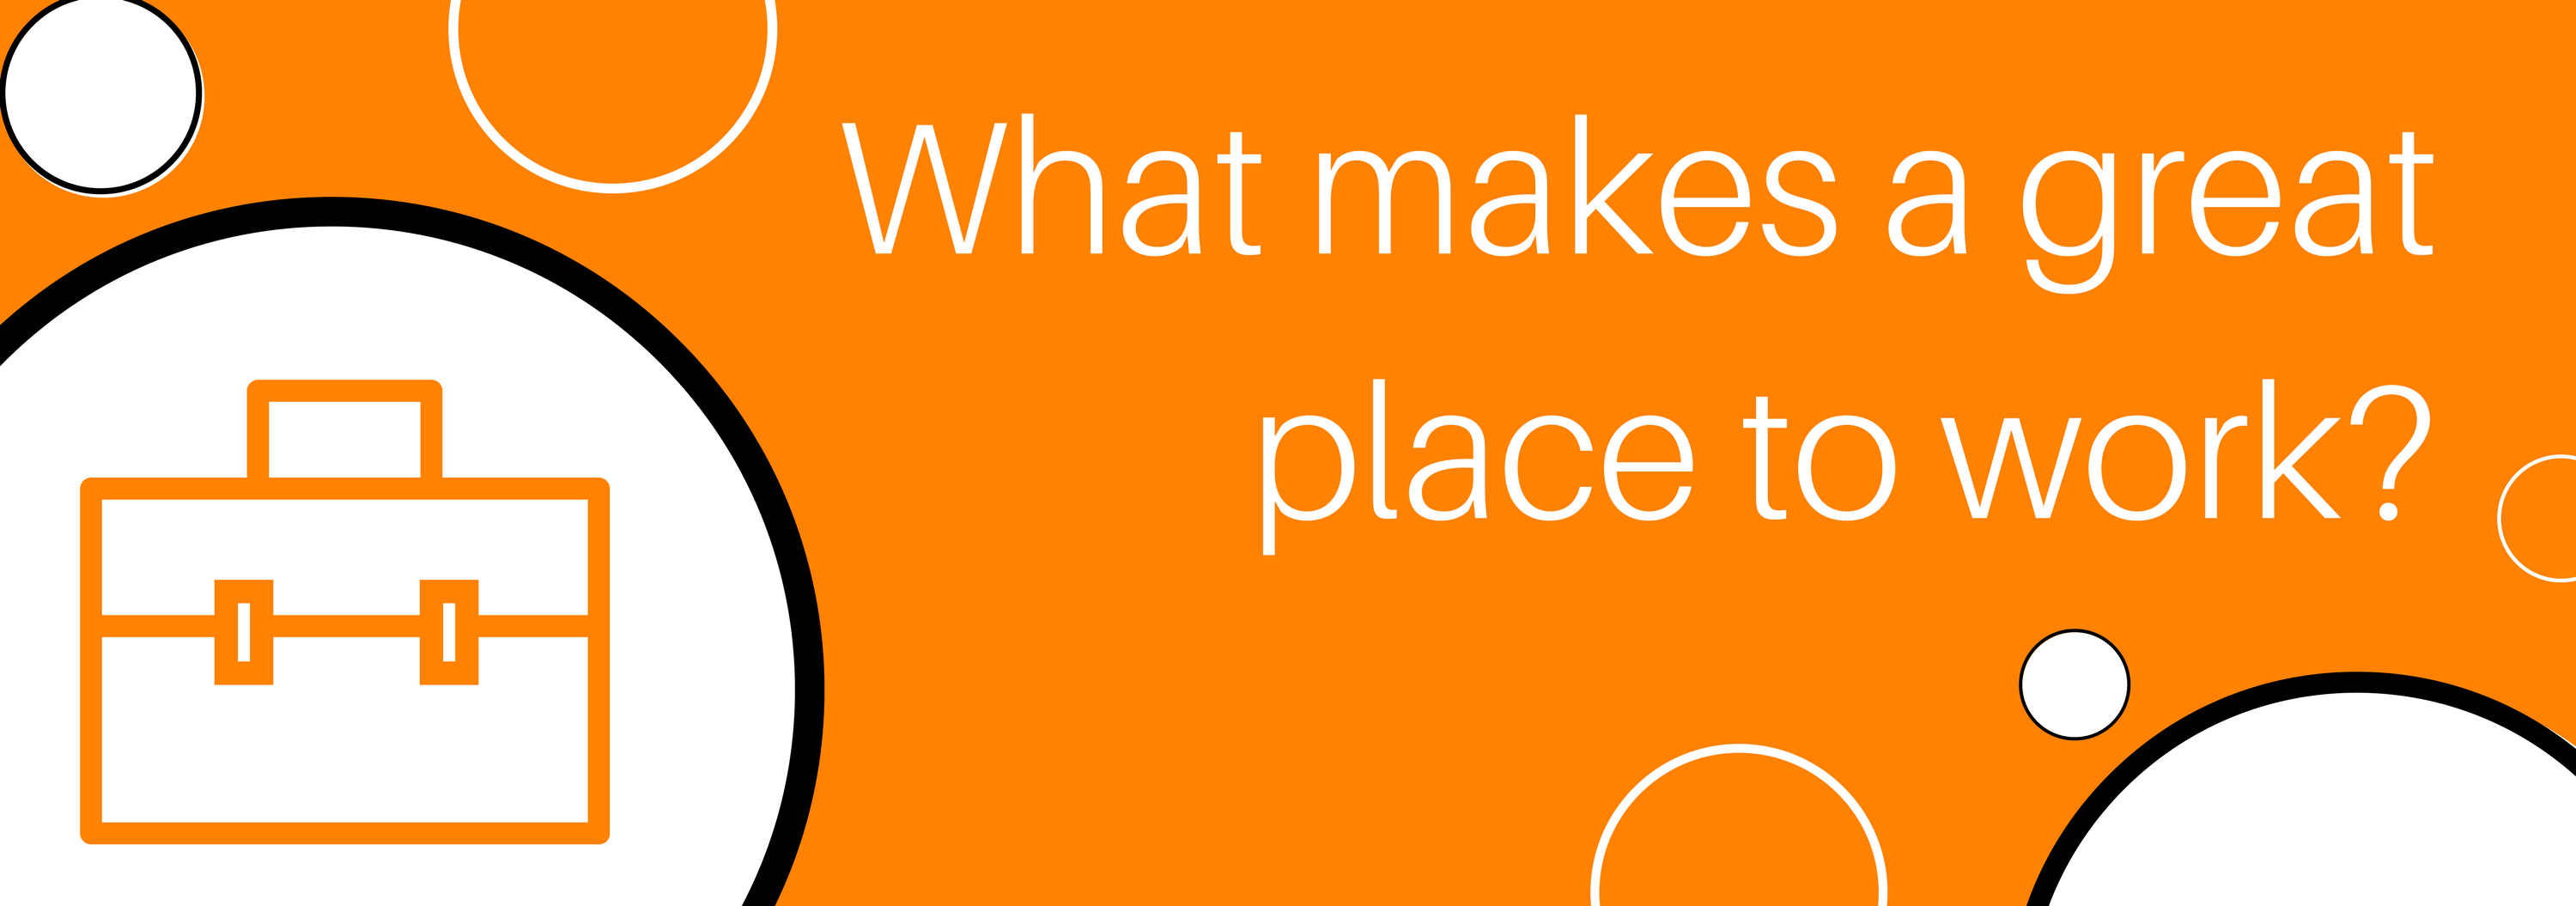 Getfeedback blog: What makes a great place to work?